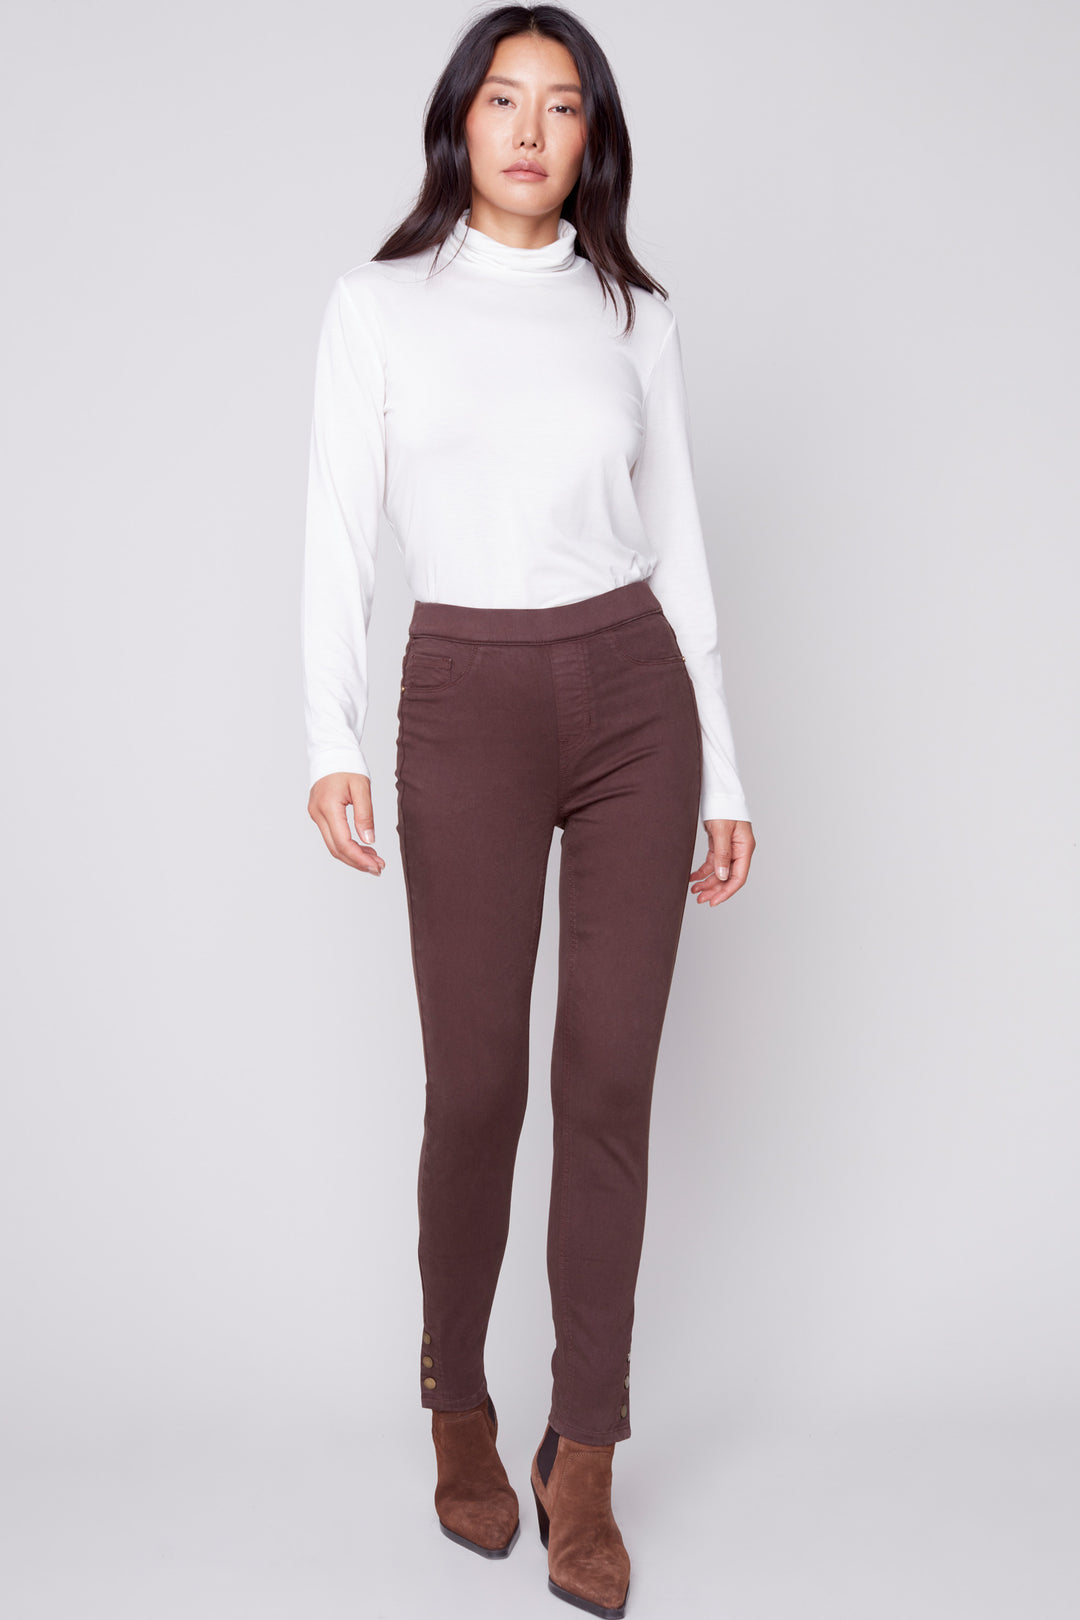 The Snap Jean is a chic pant crafted from lightweight stretch twill fabric. It features a pull-on design with a snap button hem for a polished, tailored look. The slim fit style provides a slimming silhouette and can be easily styled for a variety of occasions. Available in a chocolate colour, it’s perfect for creating a fashion-forward new look.